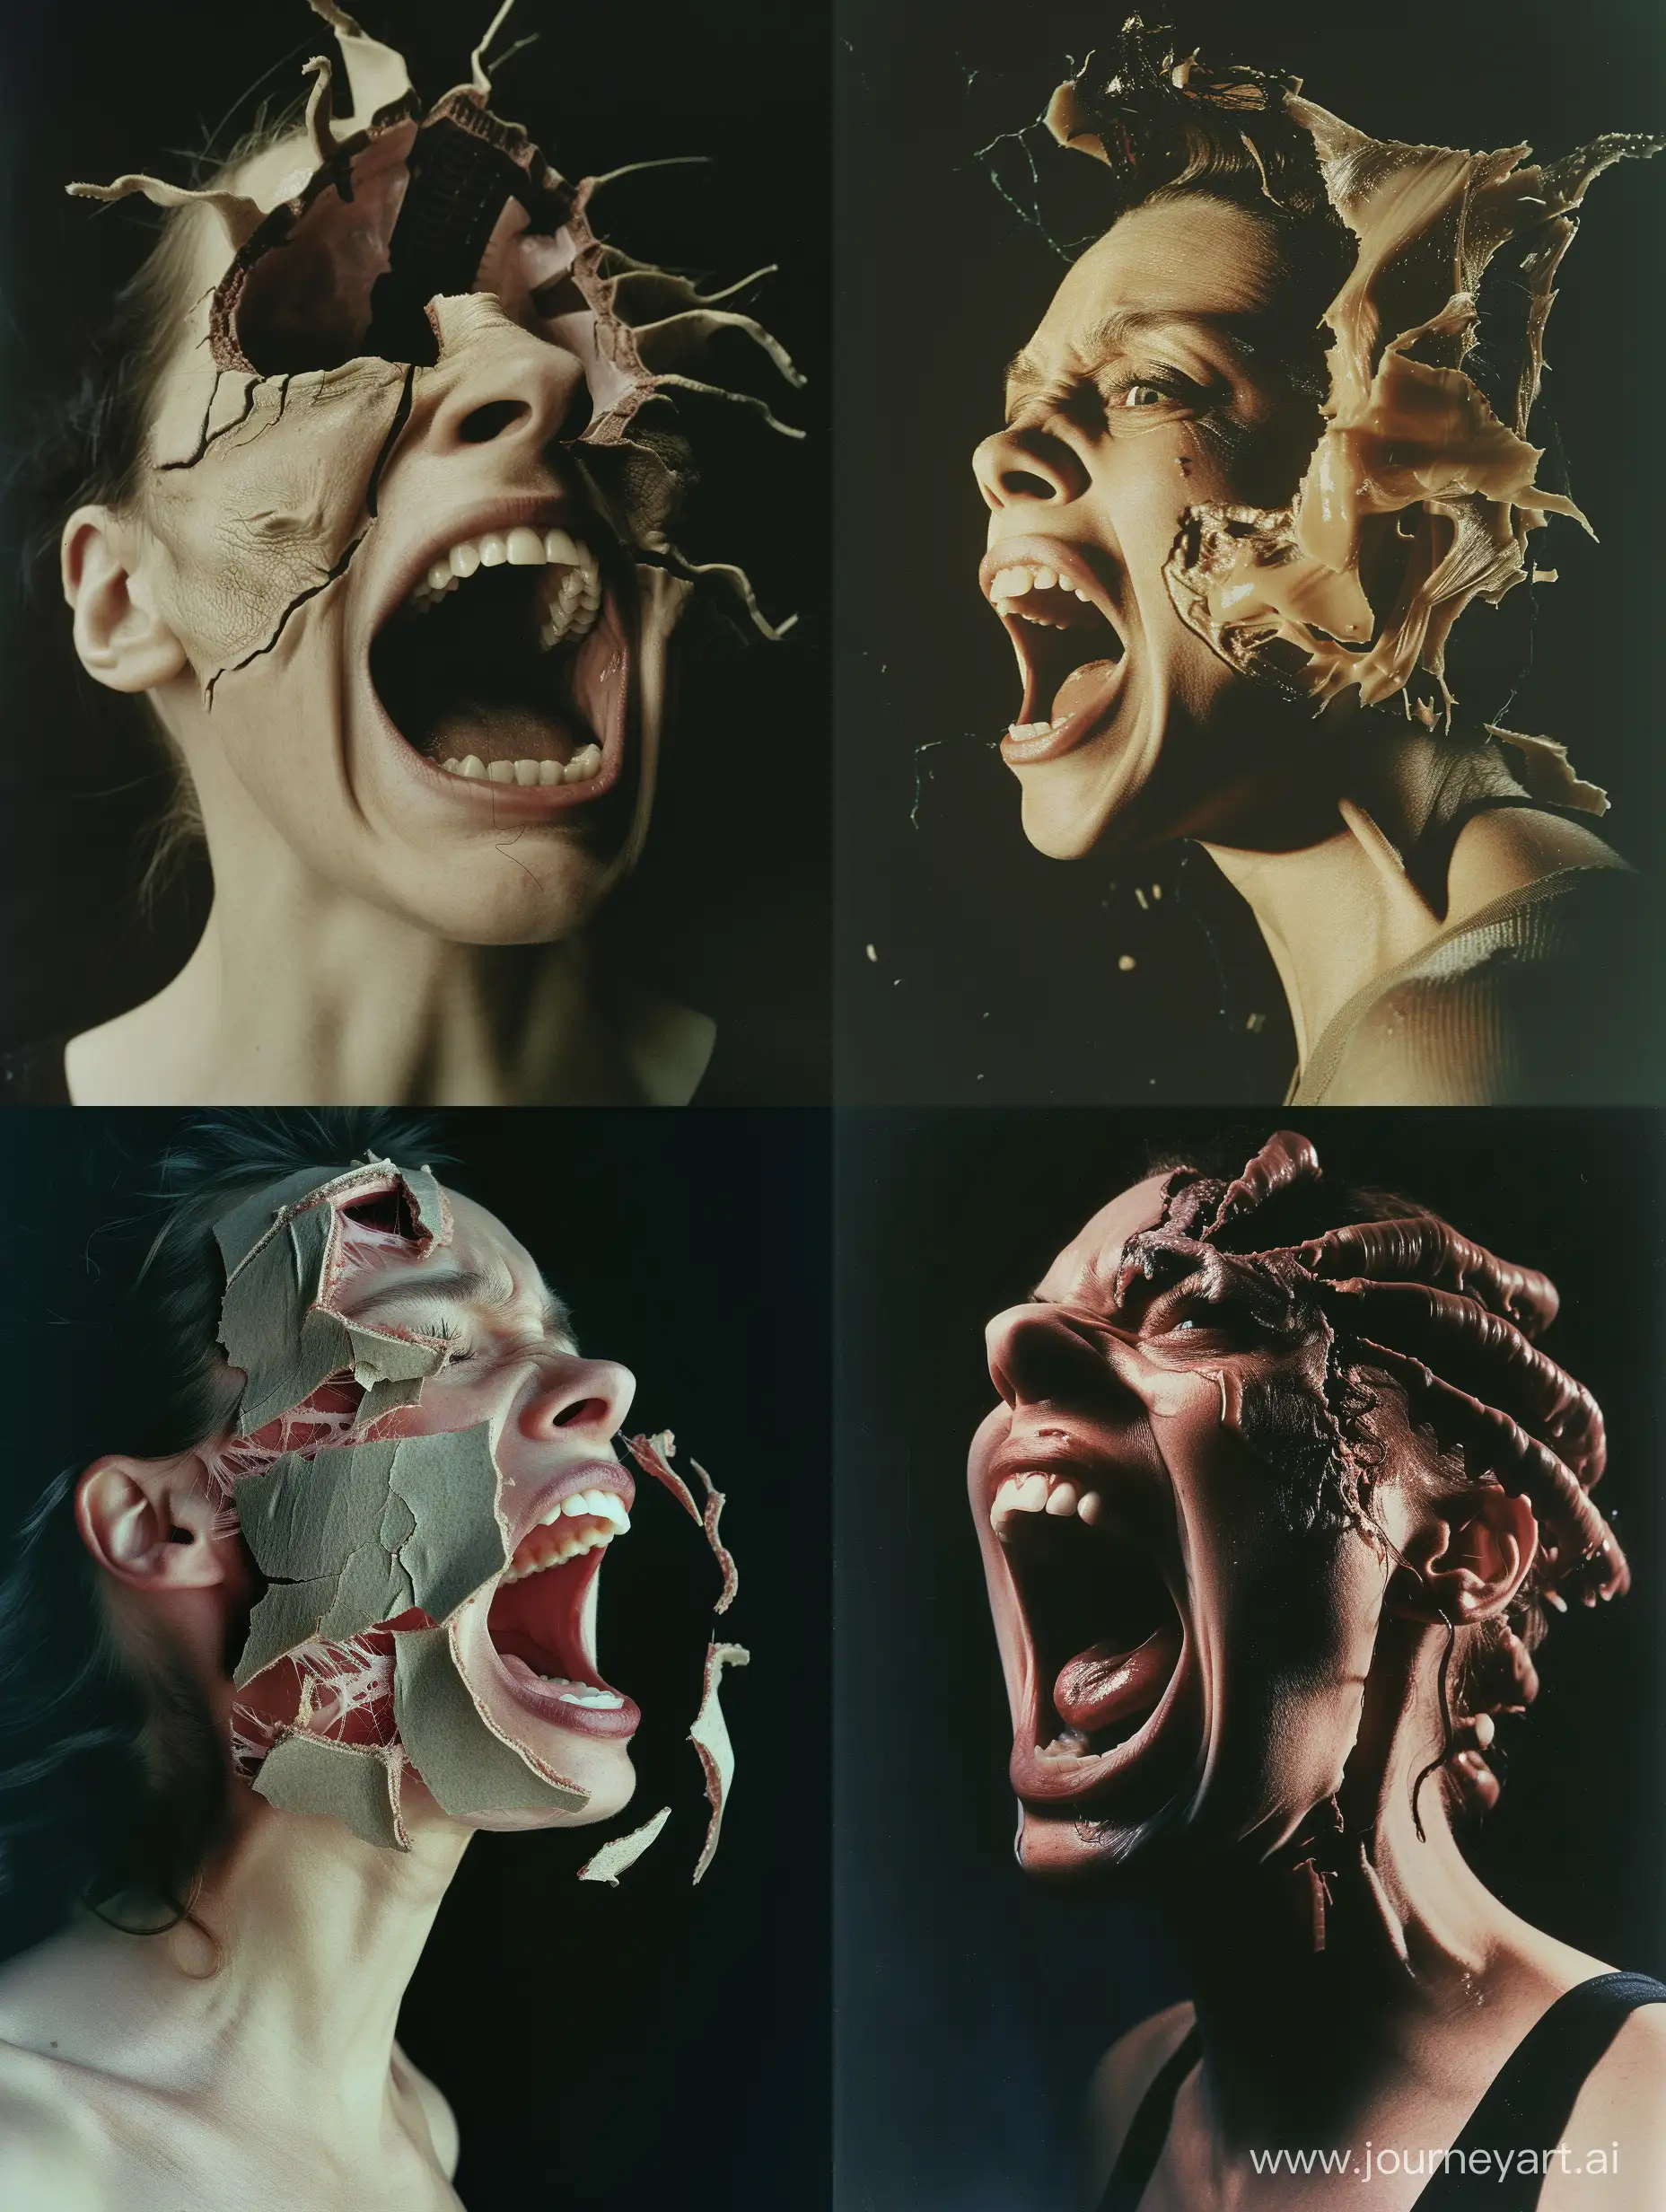 Surreal-Metamorphosis-Captivating-Womans-Transformation-into-Otherworldly-Creature